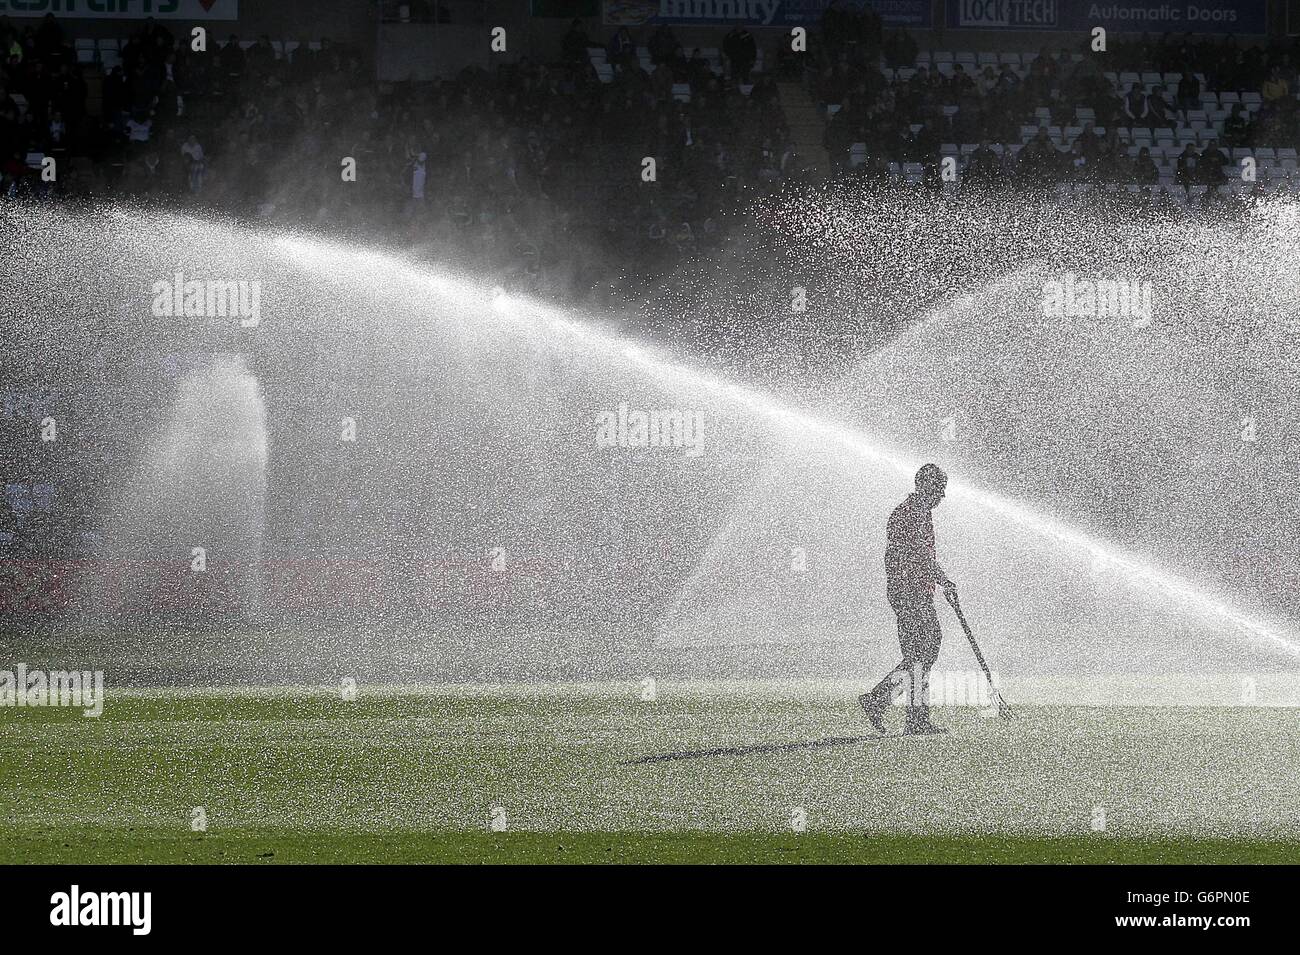 Soccer - Barclays Premier League - Swansea City v Tottenham Hotspur - Liberty Stadium. A groundsman tends to the pitch before the game Stock Photo